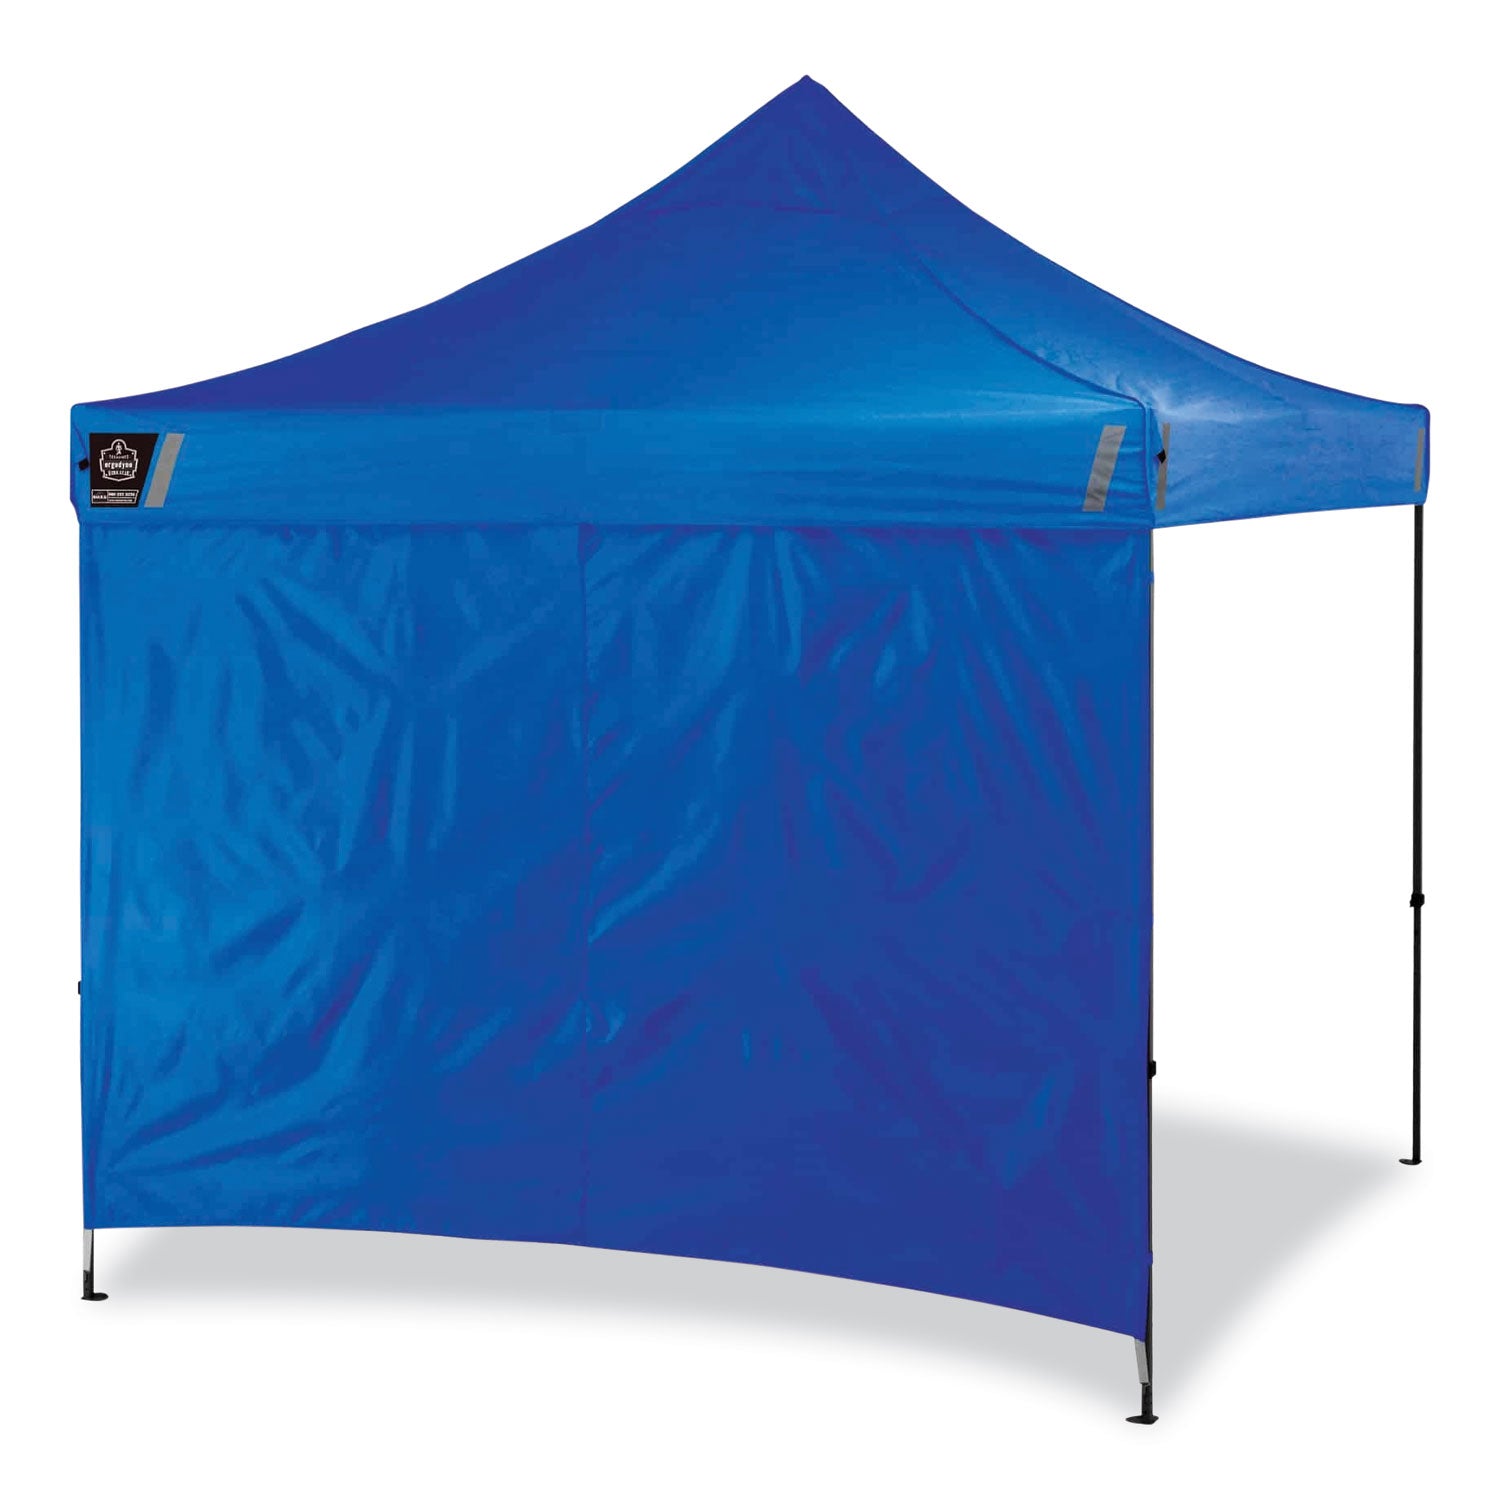 shax-6051-heavy-duty-pop-up-tent-kit-single-skin-10-ft-x-10-ft-polyester-steel-blue-ships-in-1-3-business-days_ego12952 - 7